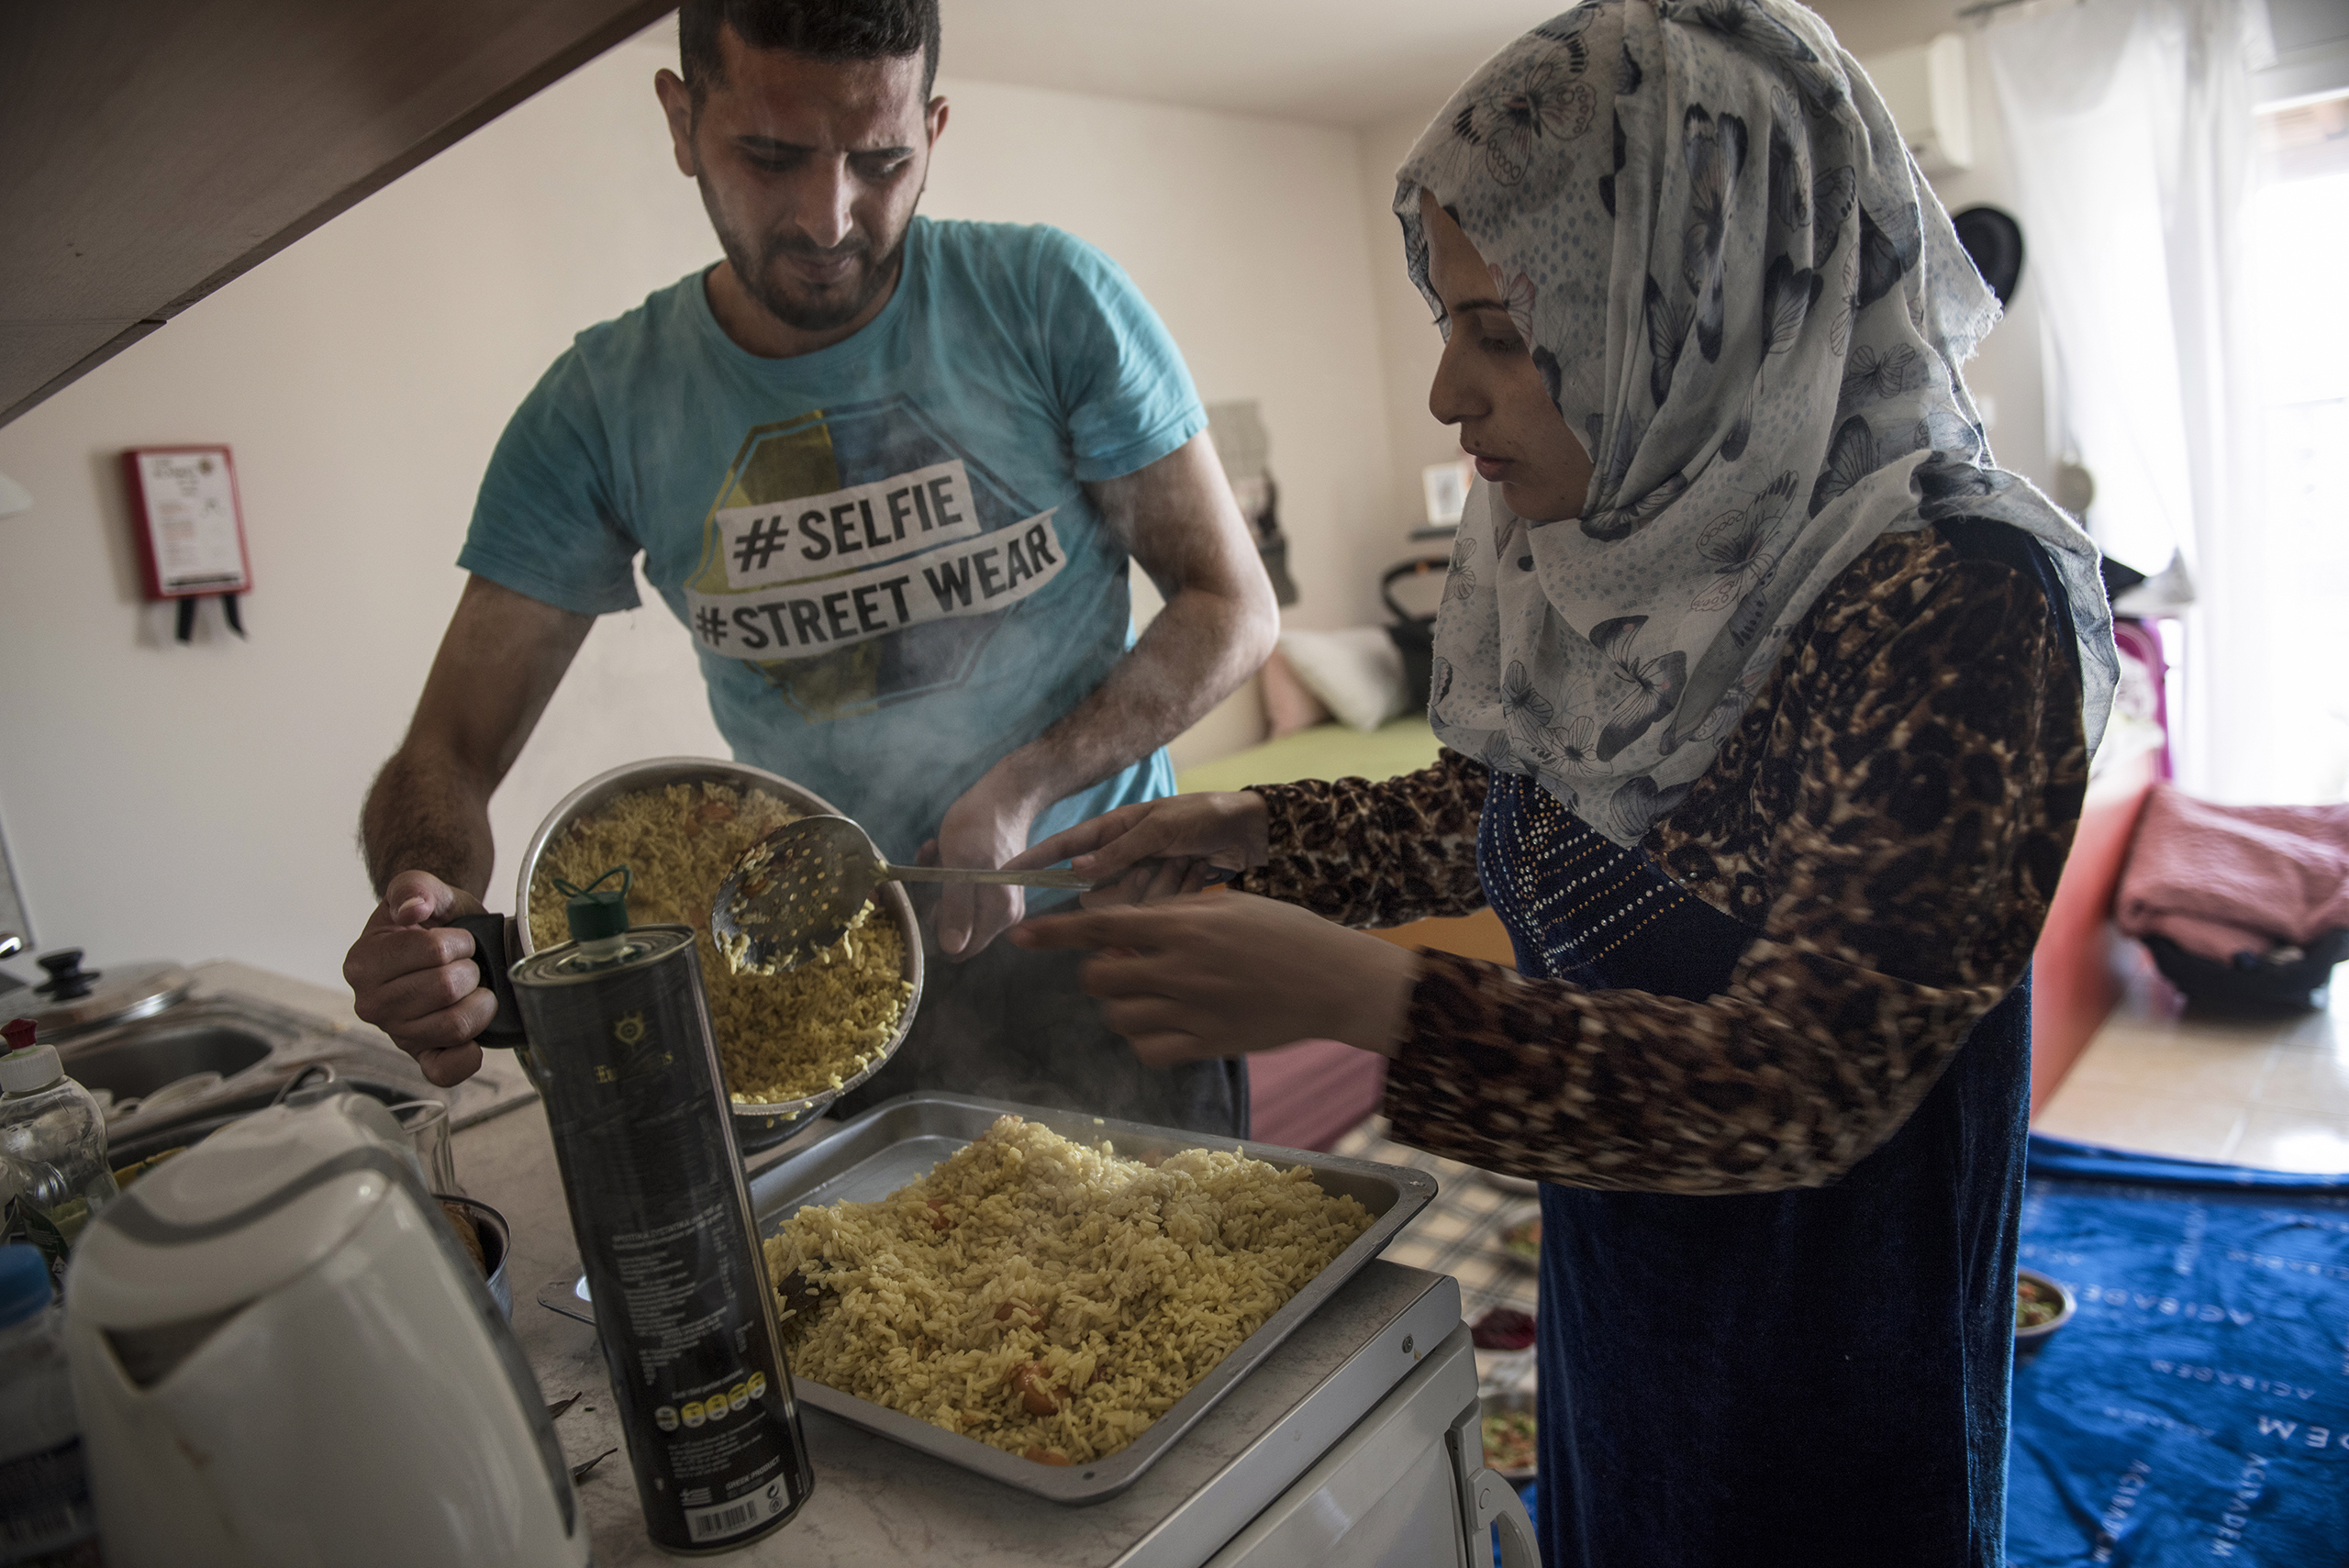 Noor Al Talaa, 22, and her husband, Yousuf Arsan, 27, prepare lunch at home with baby Rahaf, almost 6 months, at an apartment in Sidros, outside of Thessaloniki, Greece, March 28, 2017.